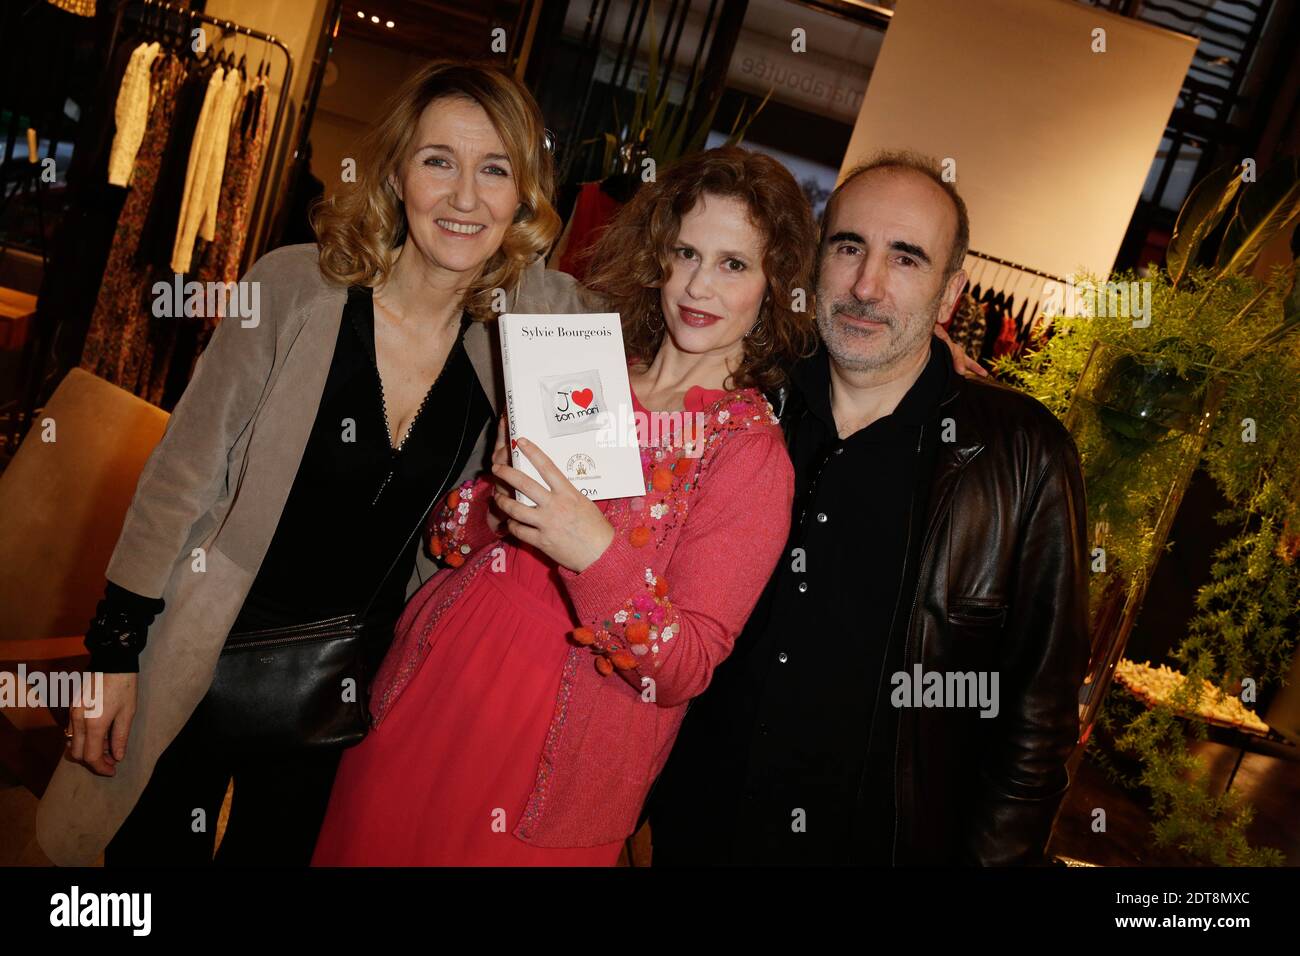 Sylvie Bourgeois releases her book 'J'aime ton mari' and signs copies ...